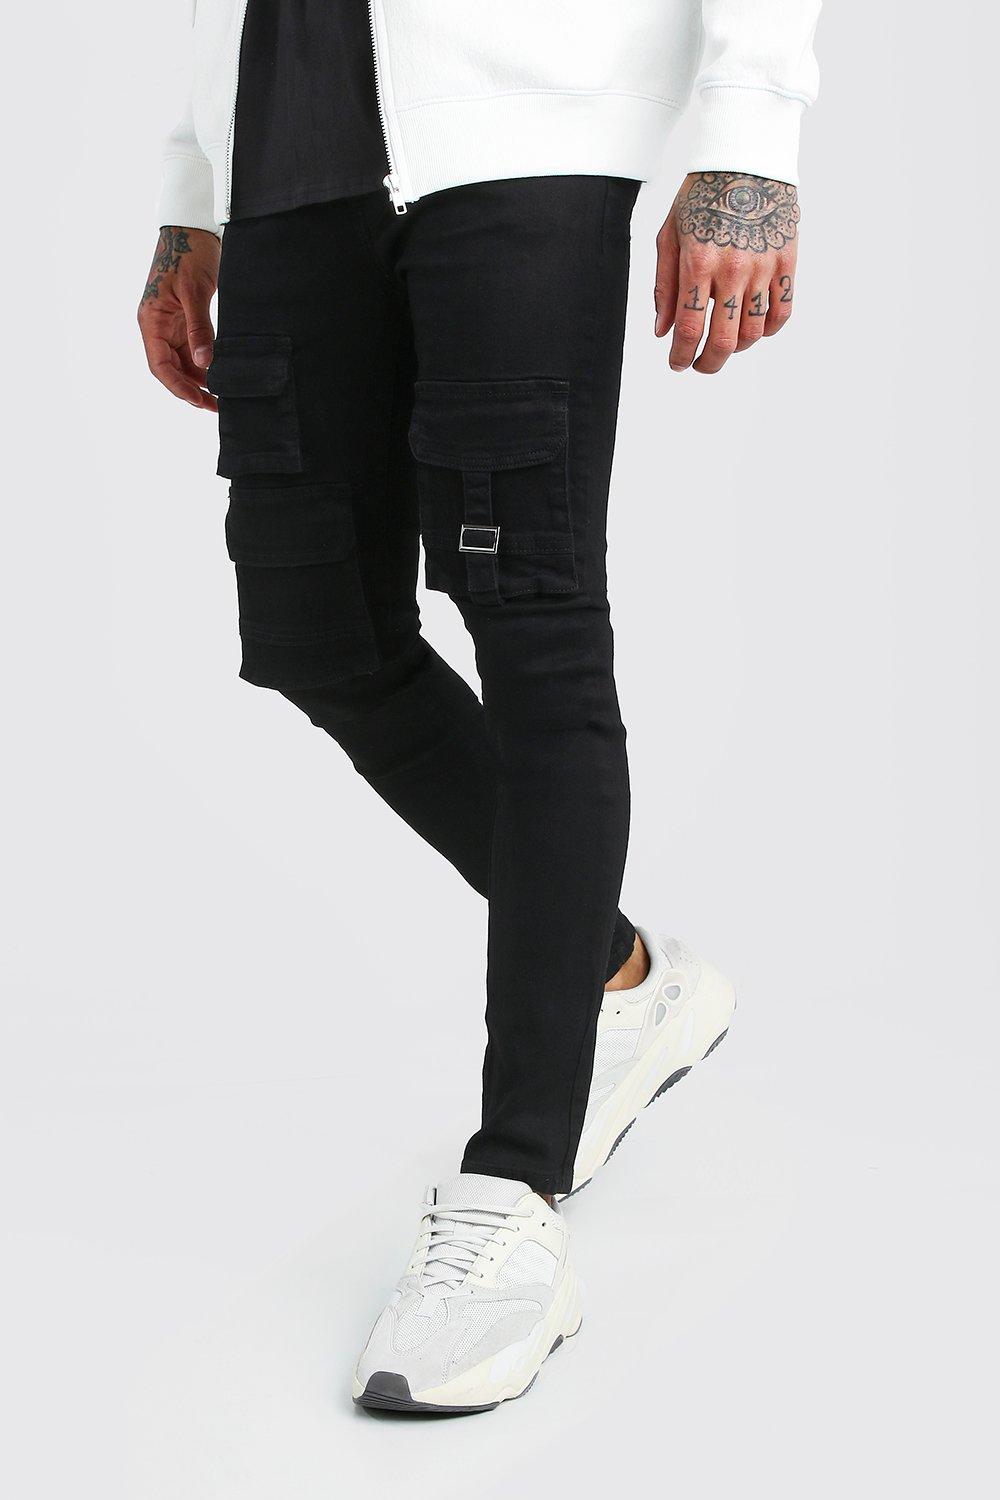 citizens of humanity sculpt jeans